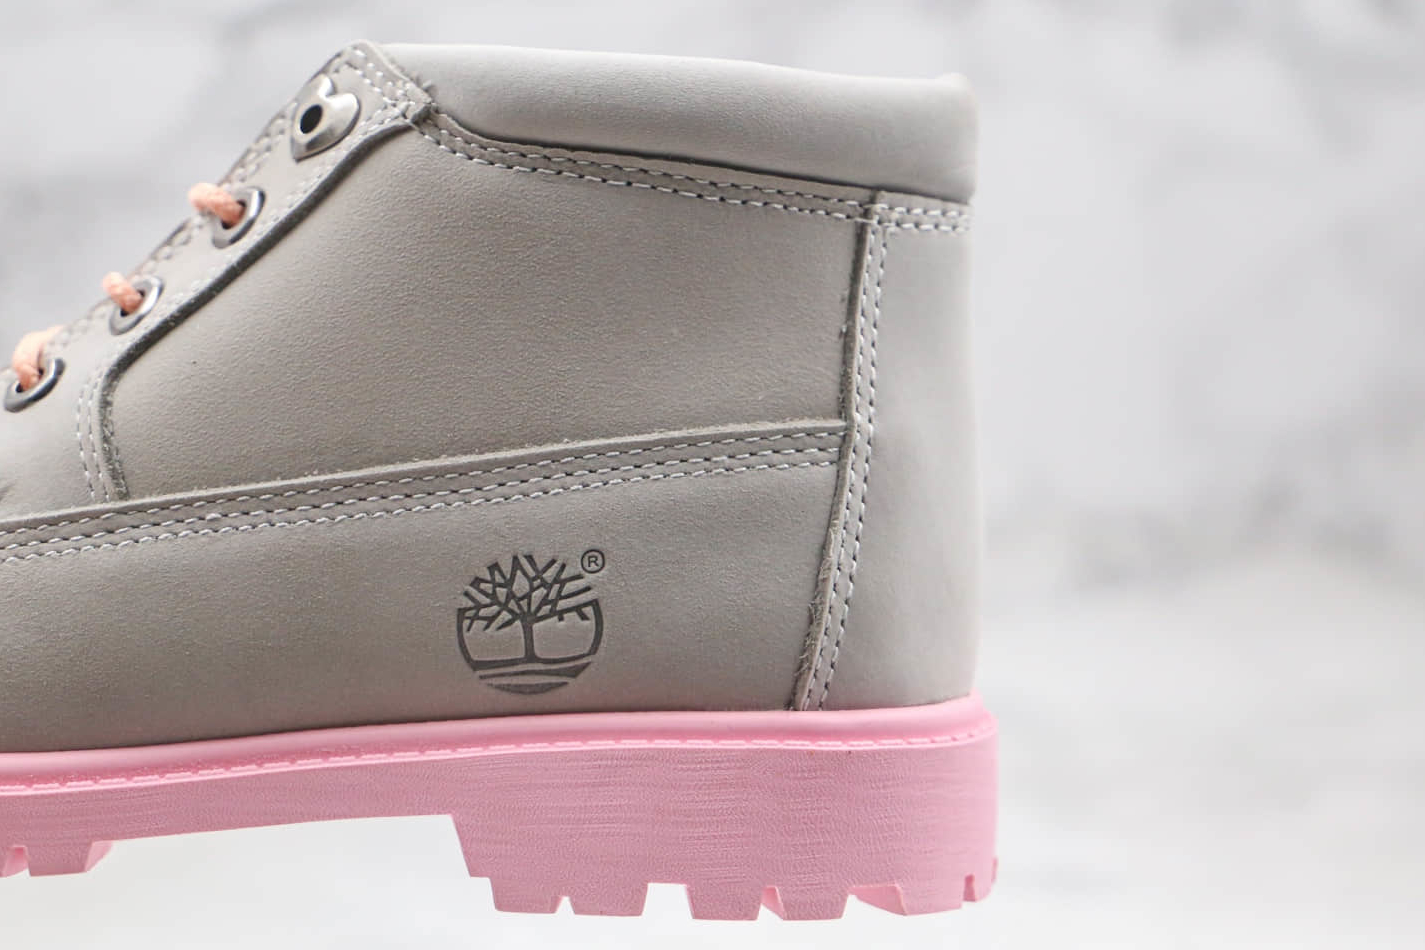 Shop the Stylish Timberland Love Collection 6-Inch Waterproof Chukka Boot - Limited Edition